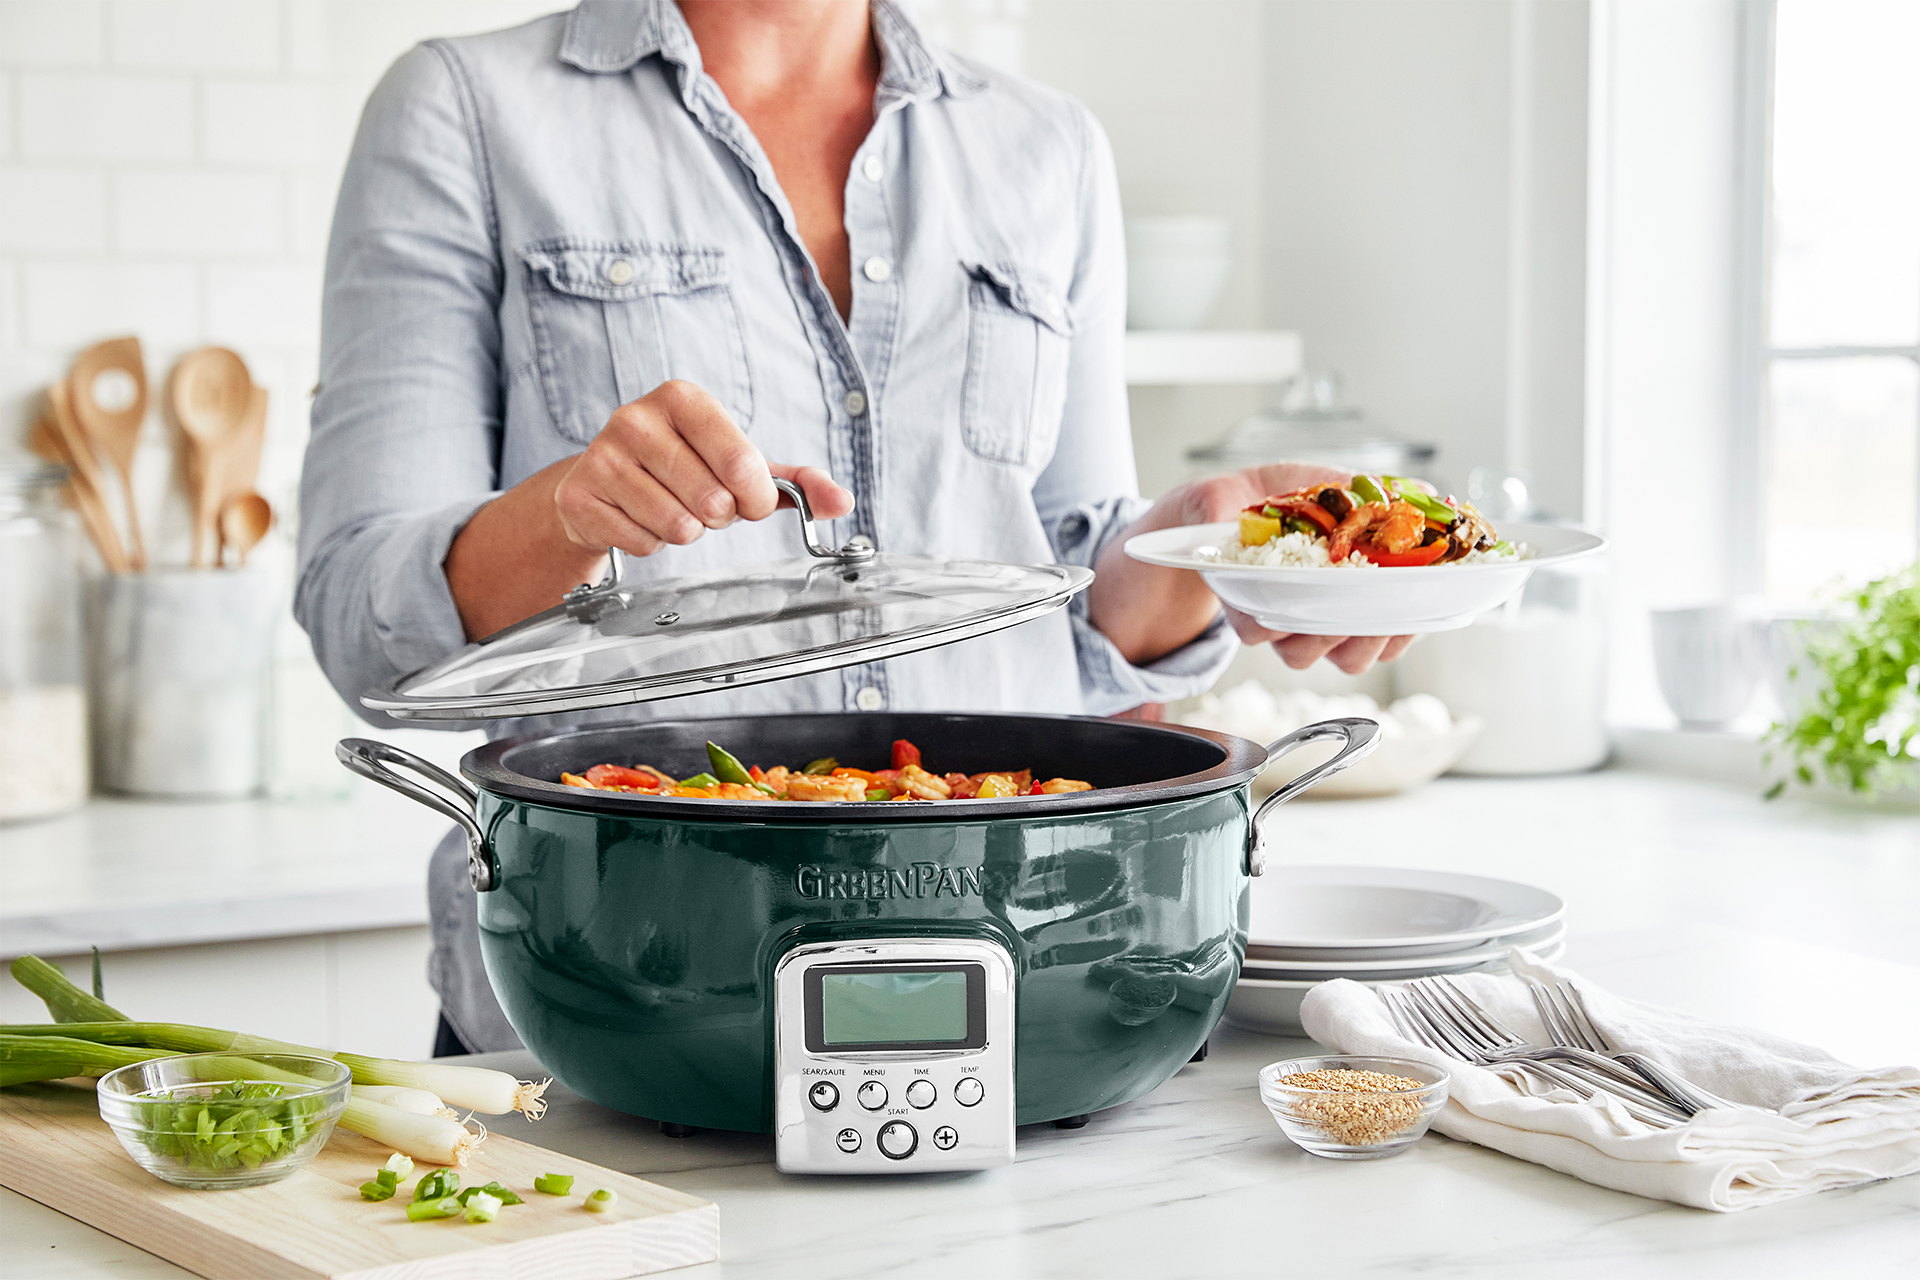 Bobby Flay Loves This Italian Cookware Brand, and Now So Do I